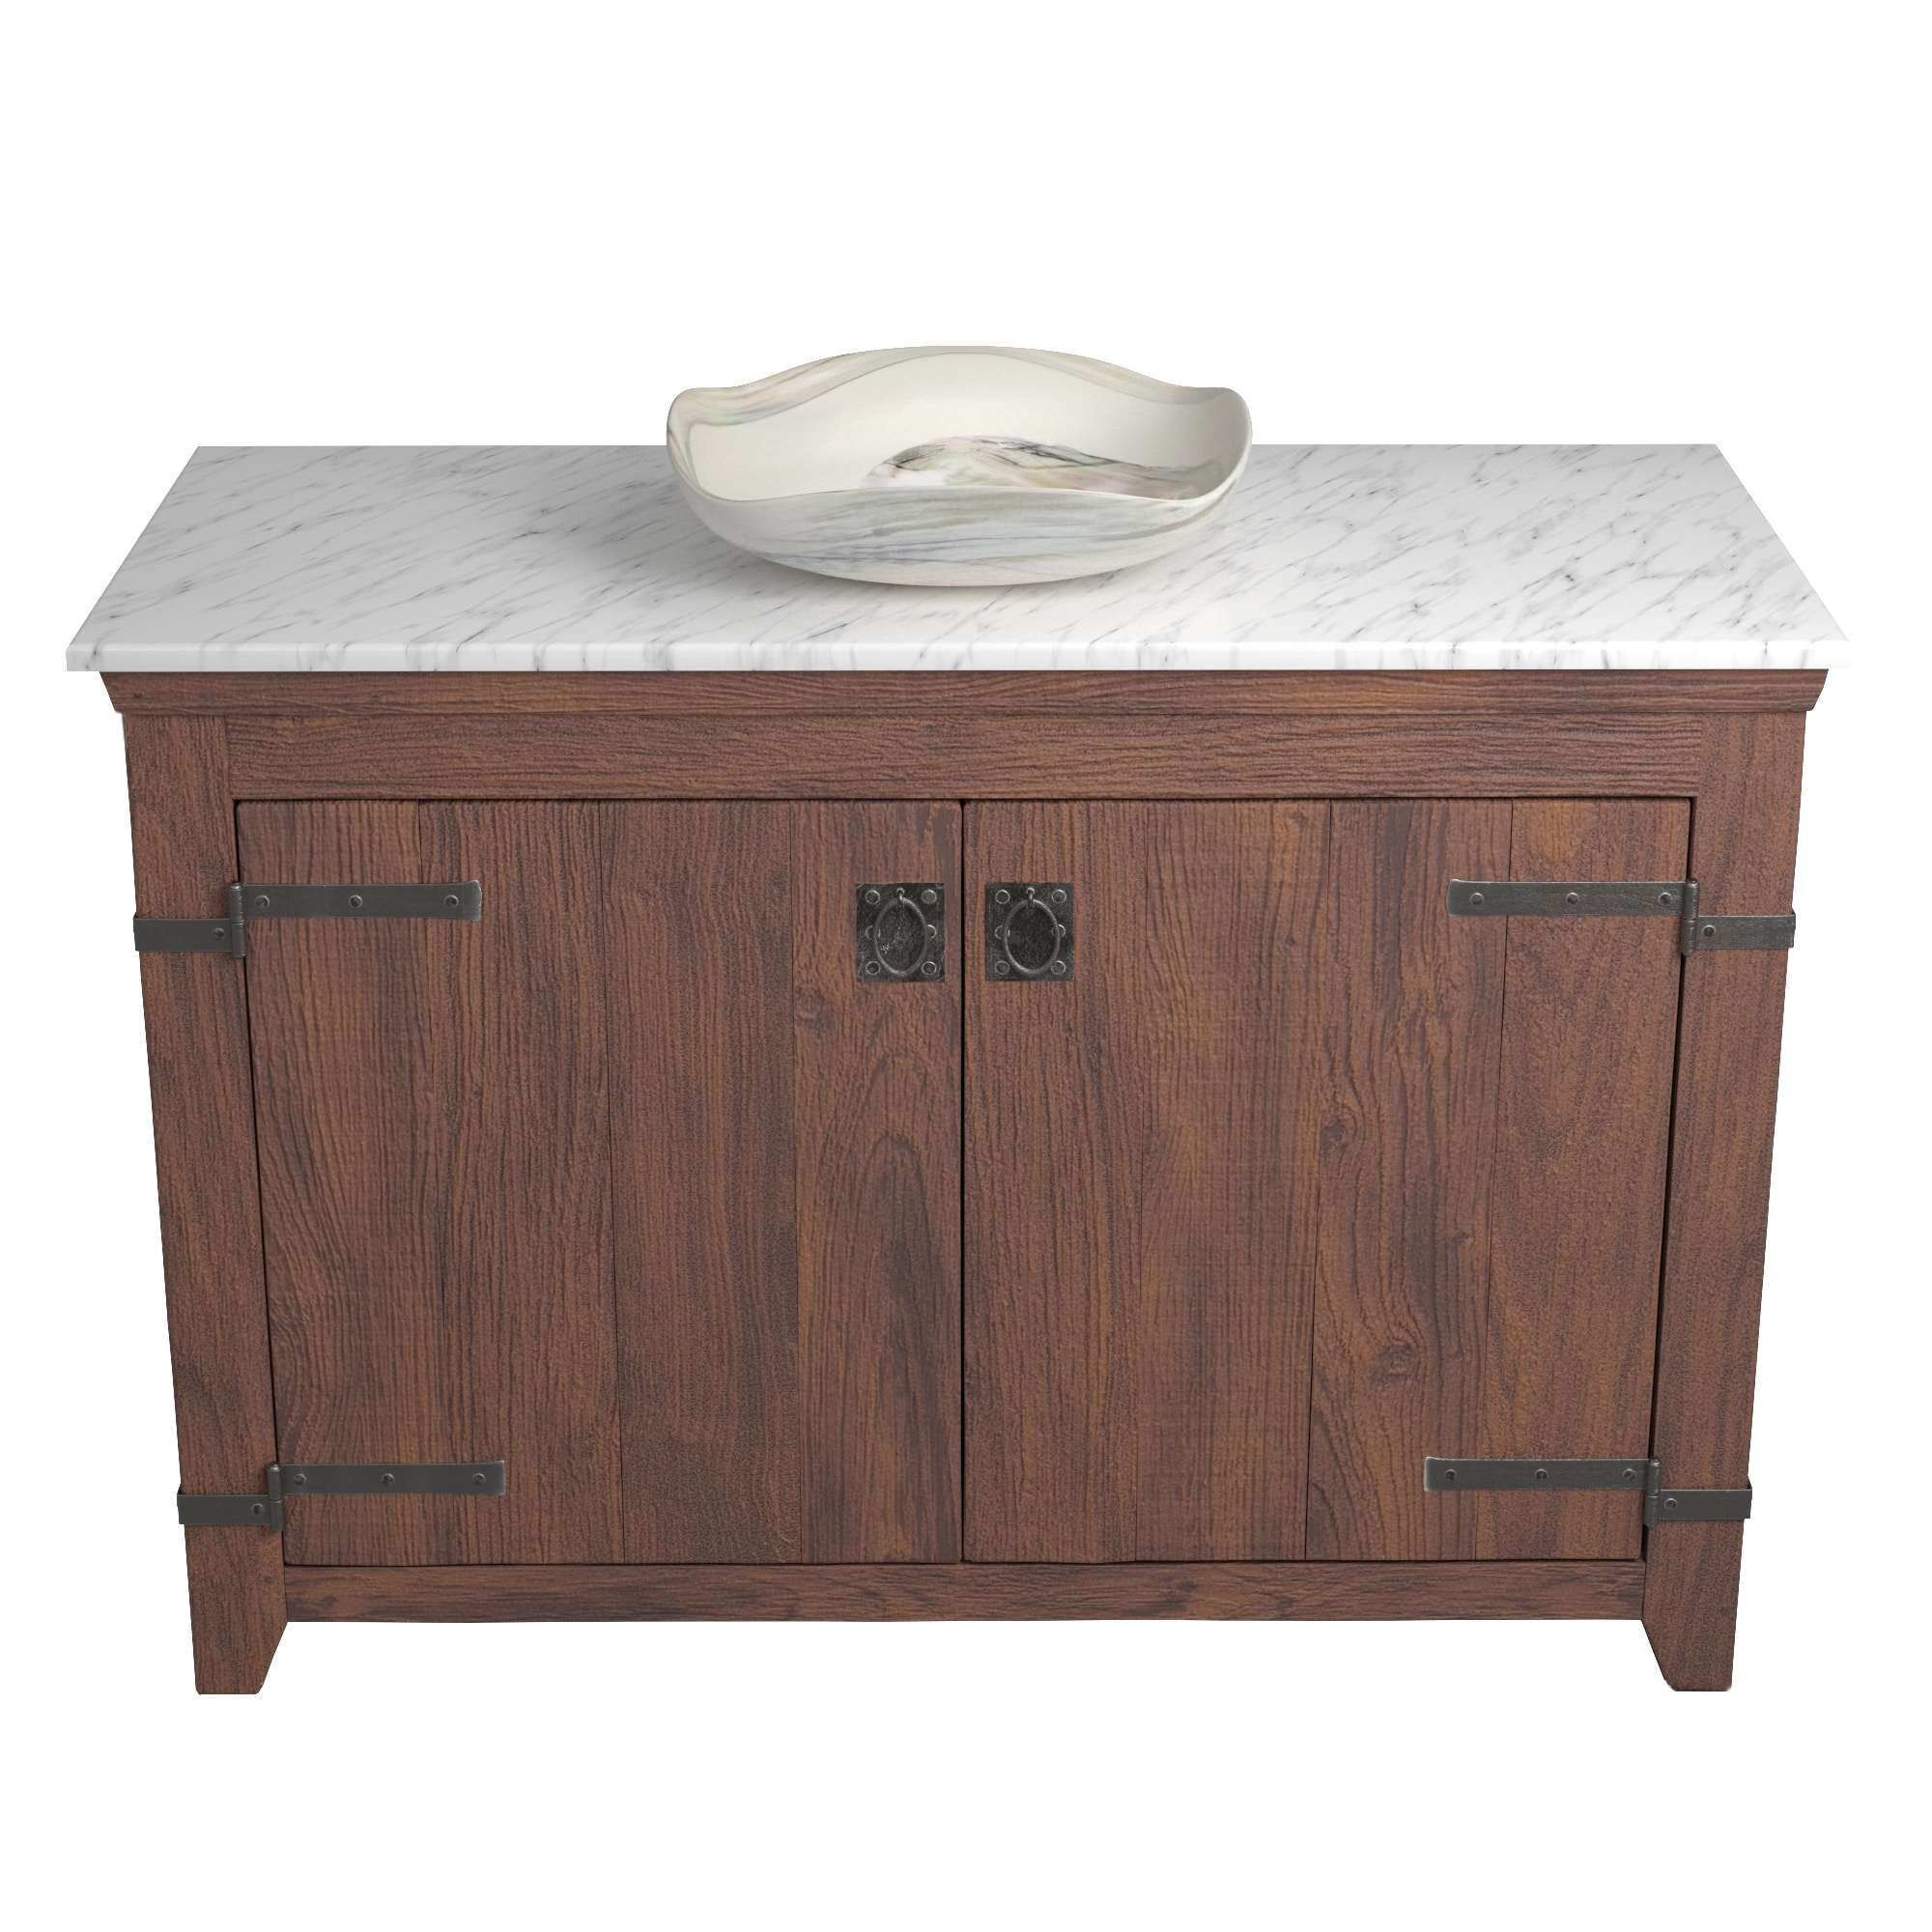 Native Trails 48" Americana Vanity in Chestnut with Carrara Marble Top and Lido in Abalone, Single Faucet Hole, BND48-VB-CT-MG-003